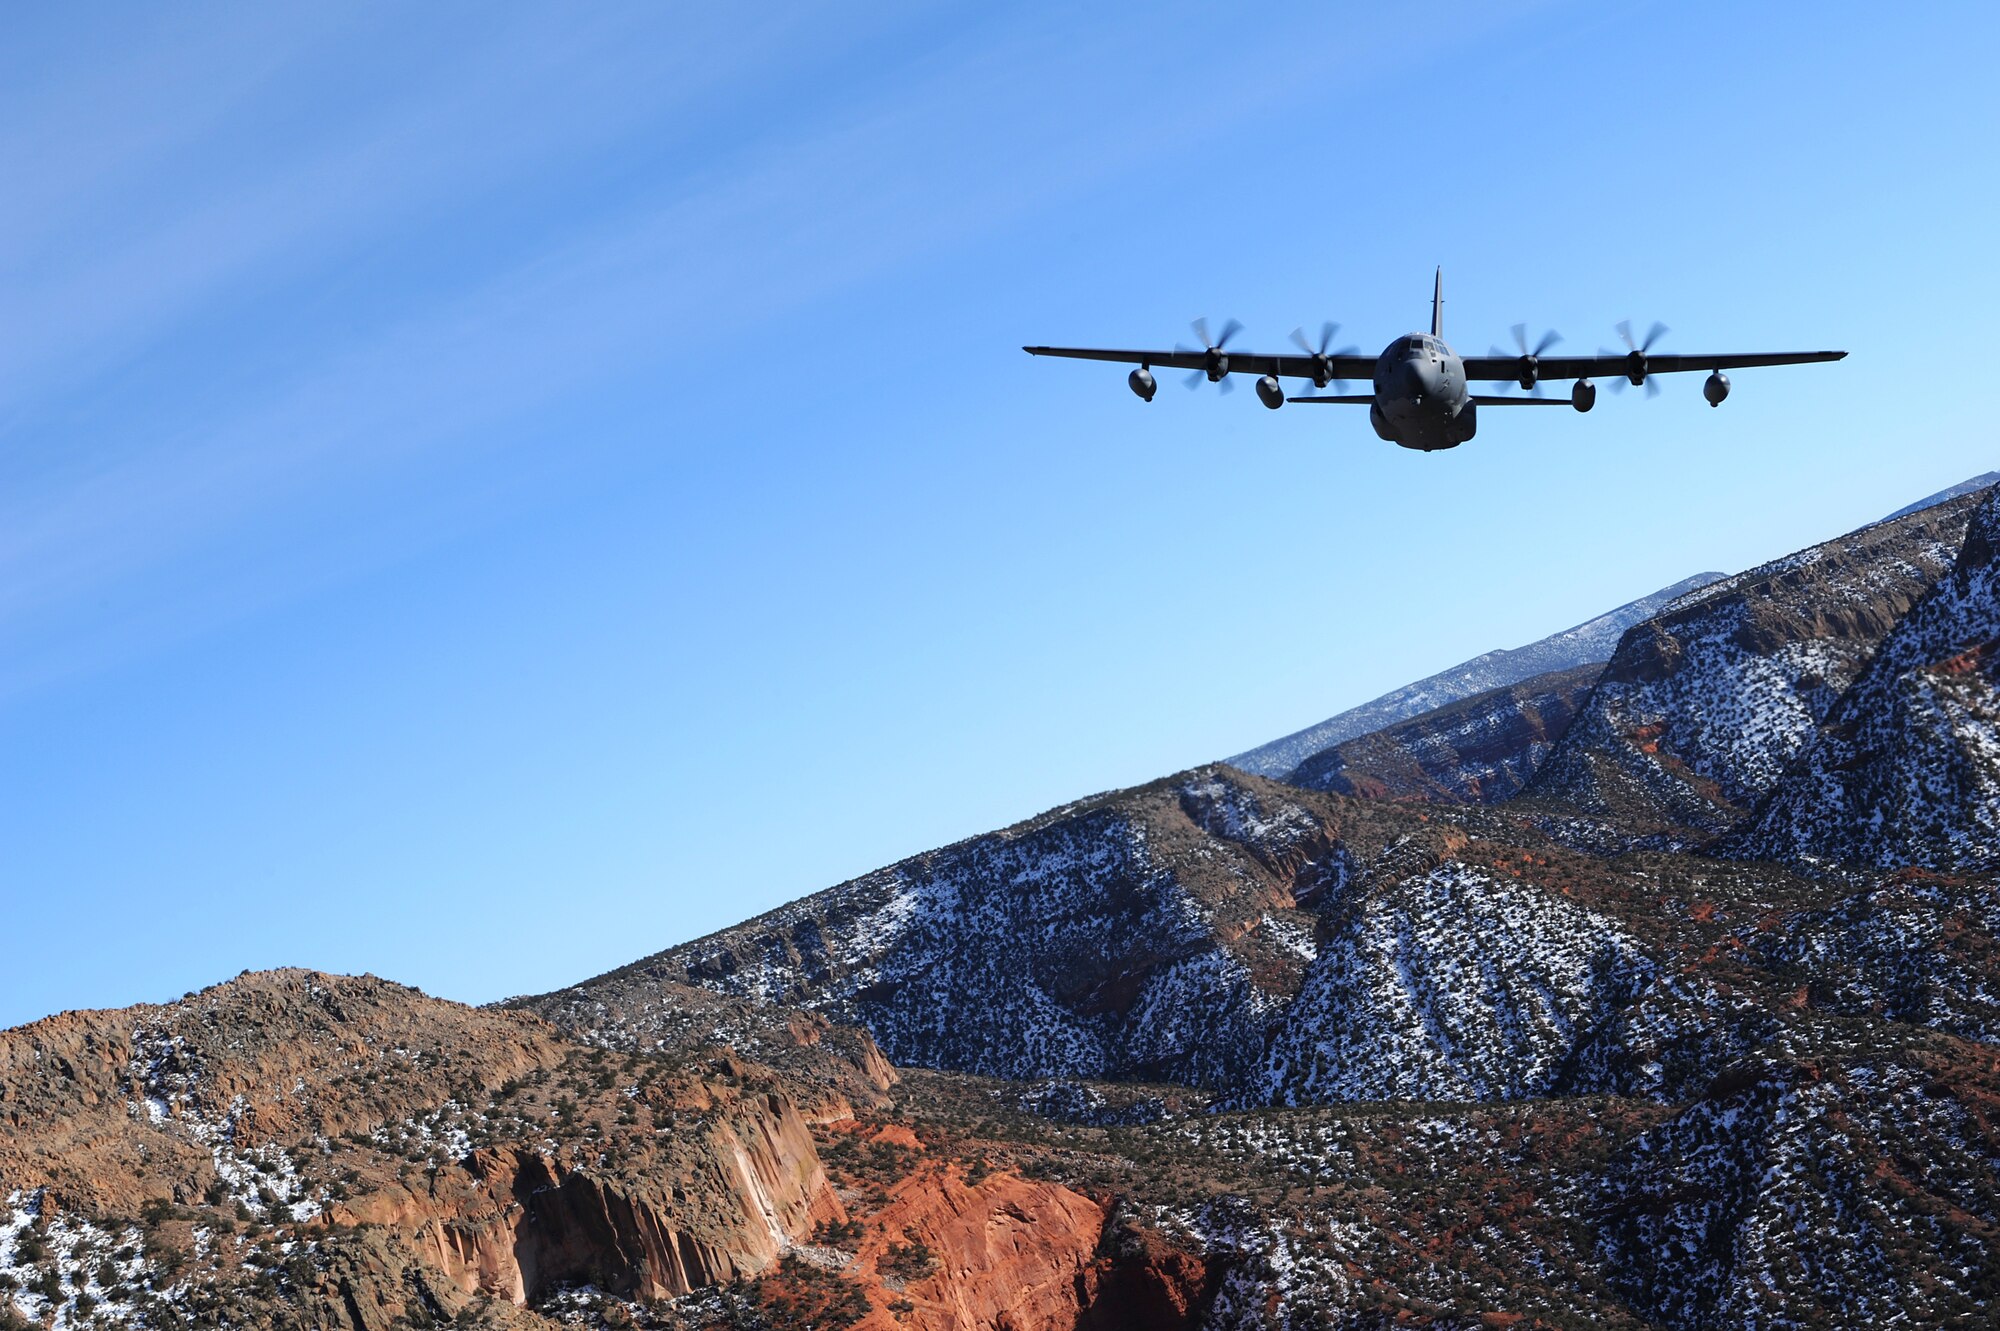 A 522nd Special Operations Squadron MC-130J Commando II aircraft, flies over the skies of New Mexico, Jan. 4, 2012.  The 522 SOS is stationed at Cannon Air Force Base, N.M. and the MC-130J provides in-flight refueling, infiltration/exfiltration and aerial delivery resupply of special operations forces.  (U.S. Air Force photo by Senior Airman James Bell)